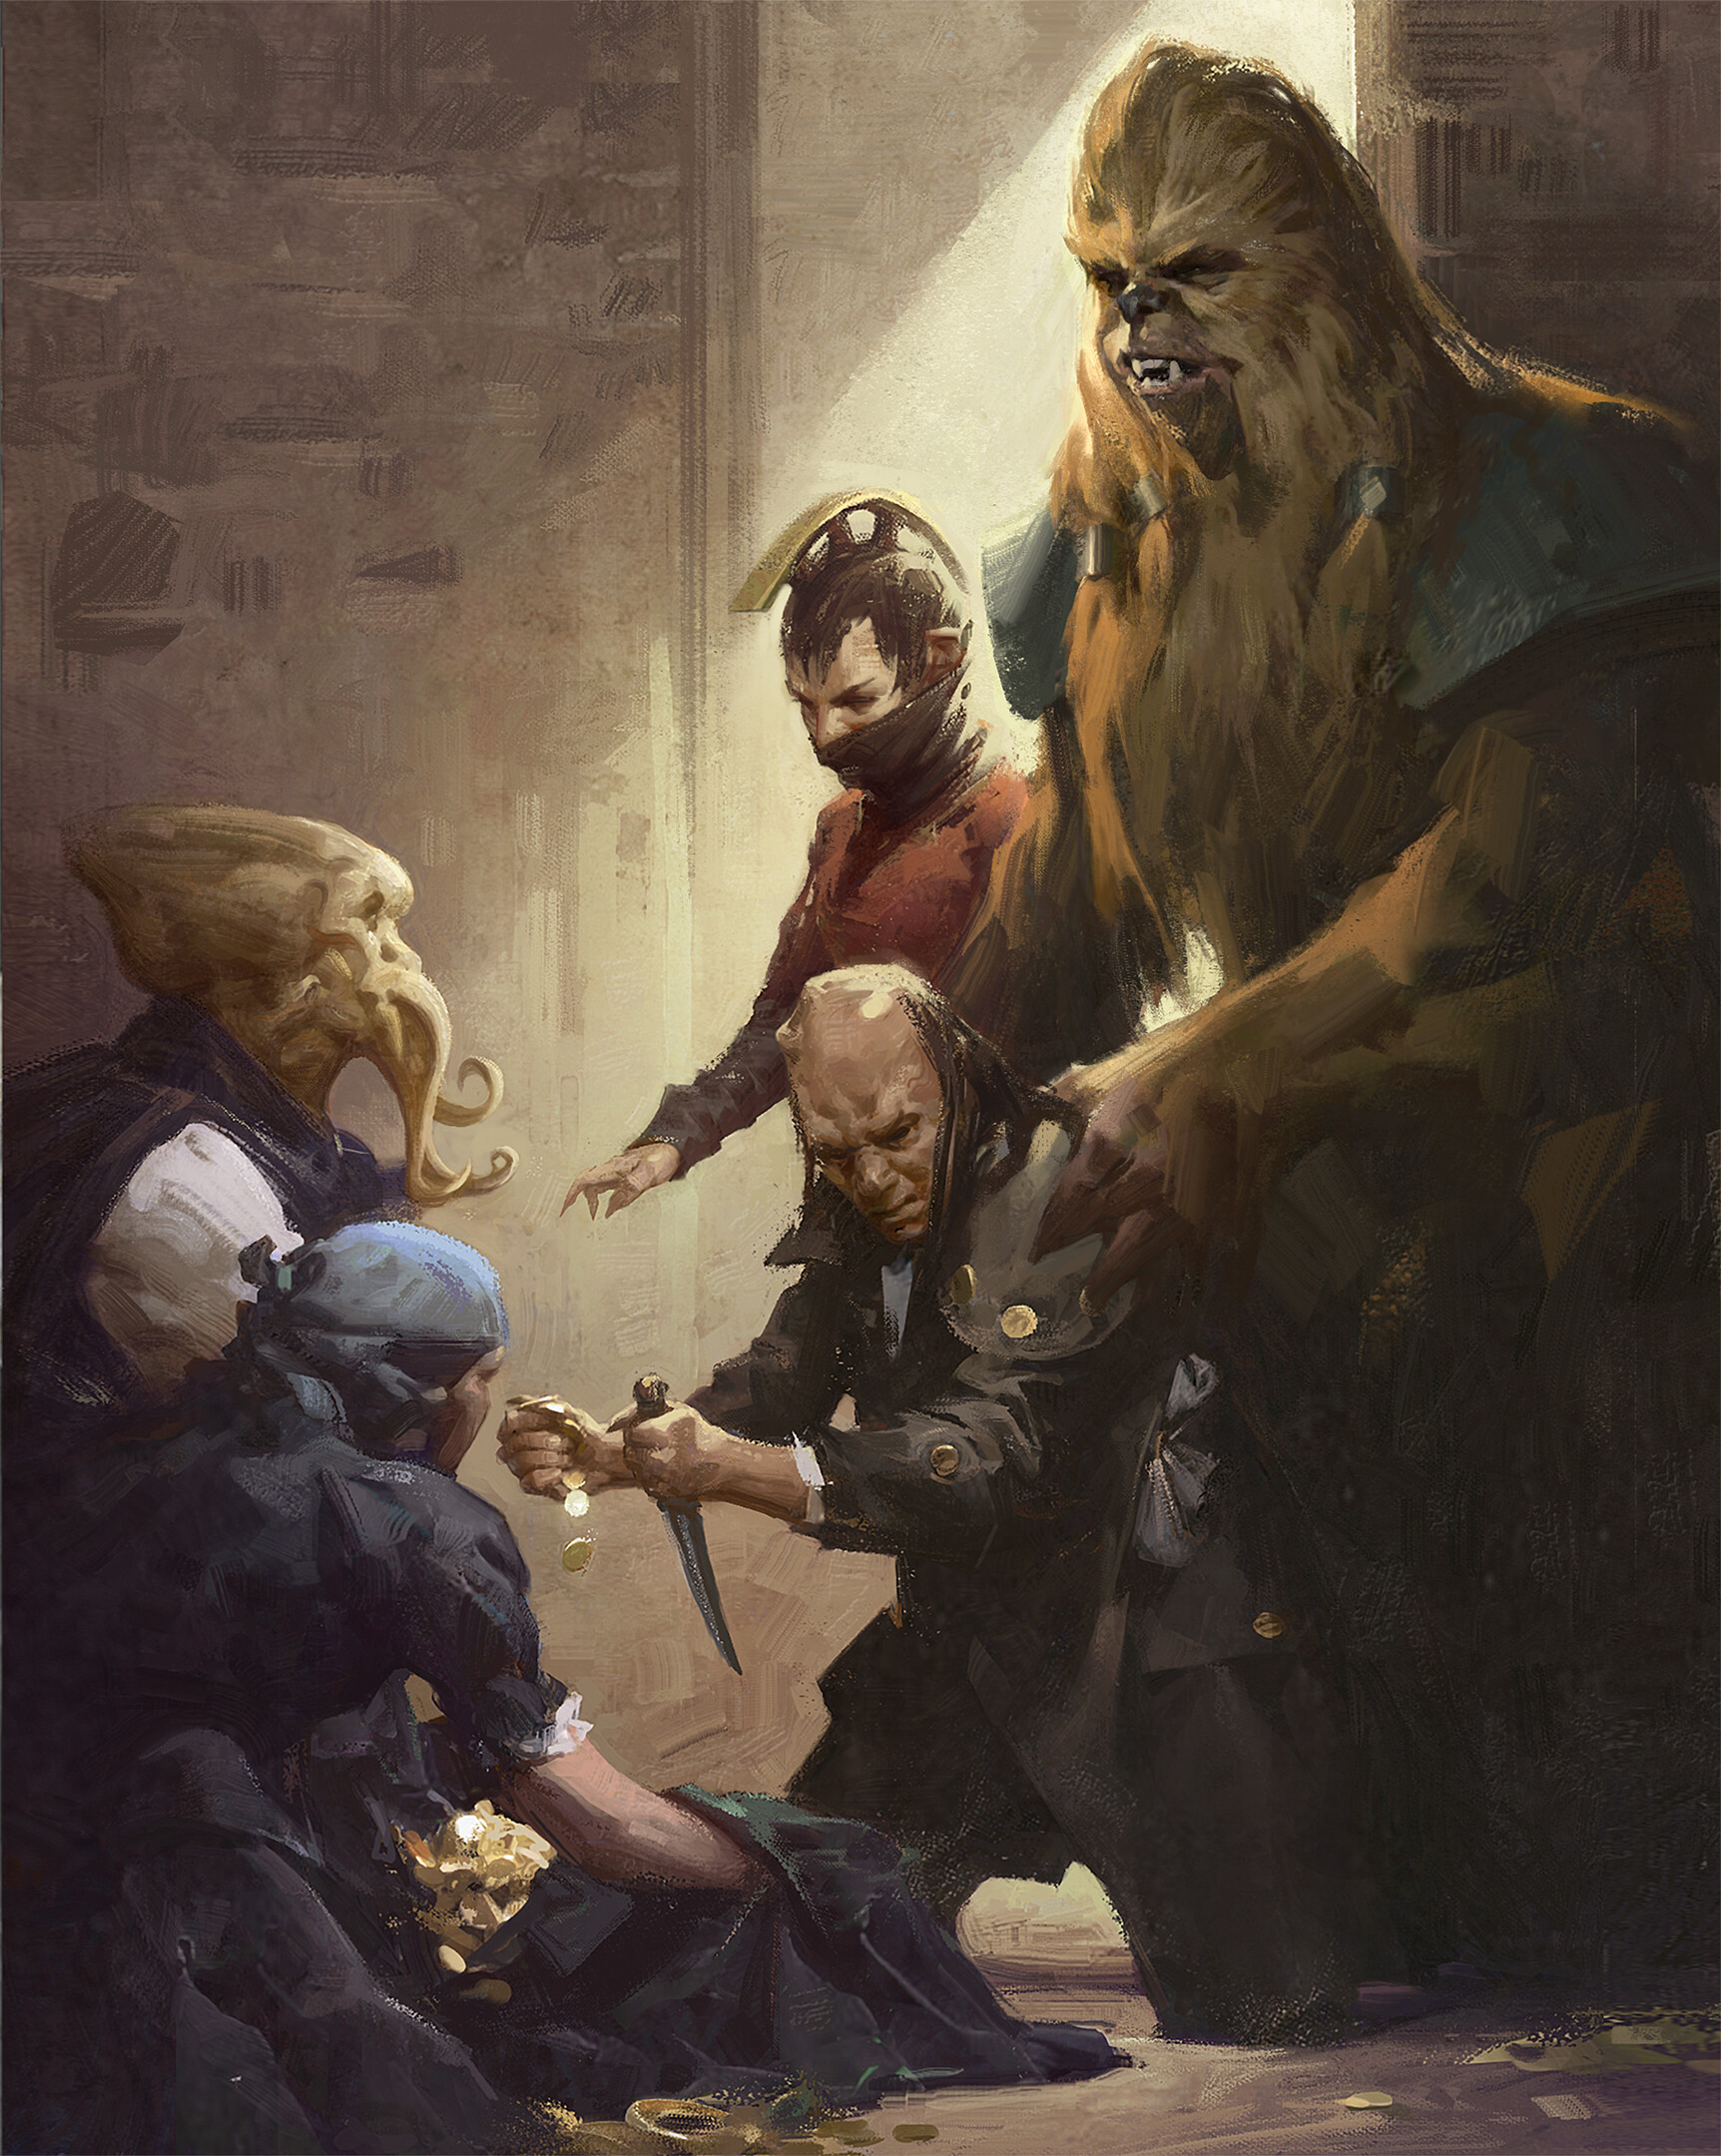 7_grant-griffin-lp-thewitchandthewookiee-finalapproved-gg-artstation.jpg